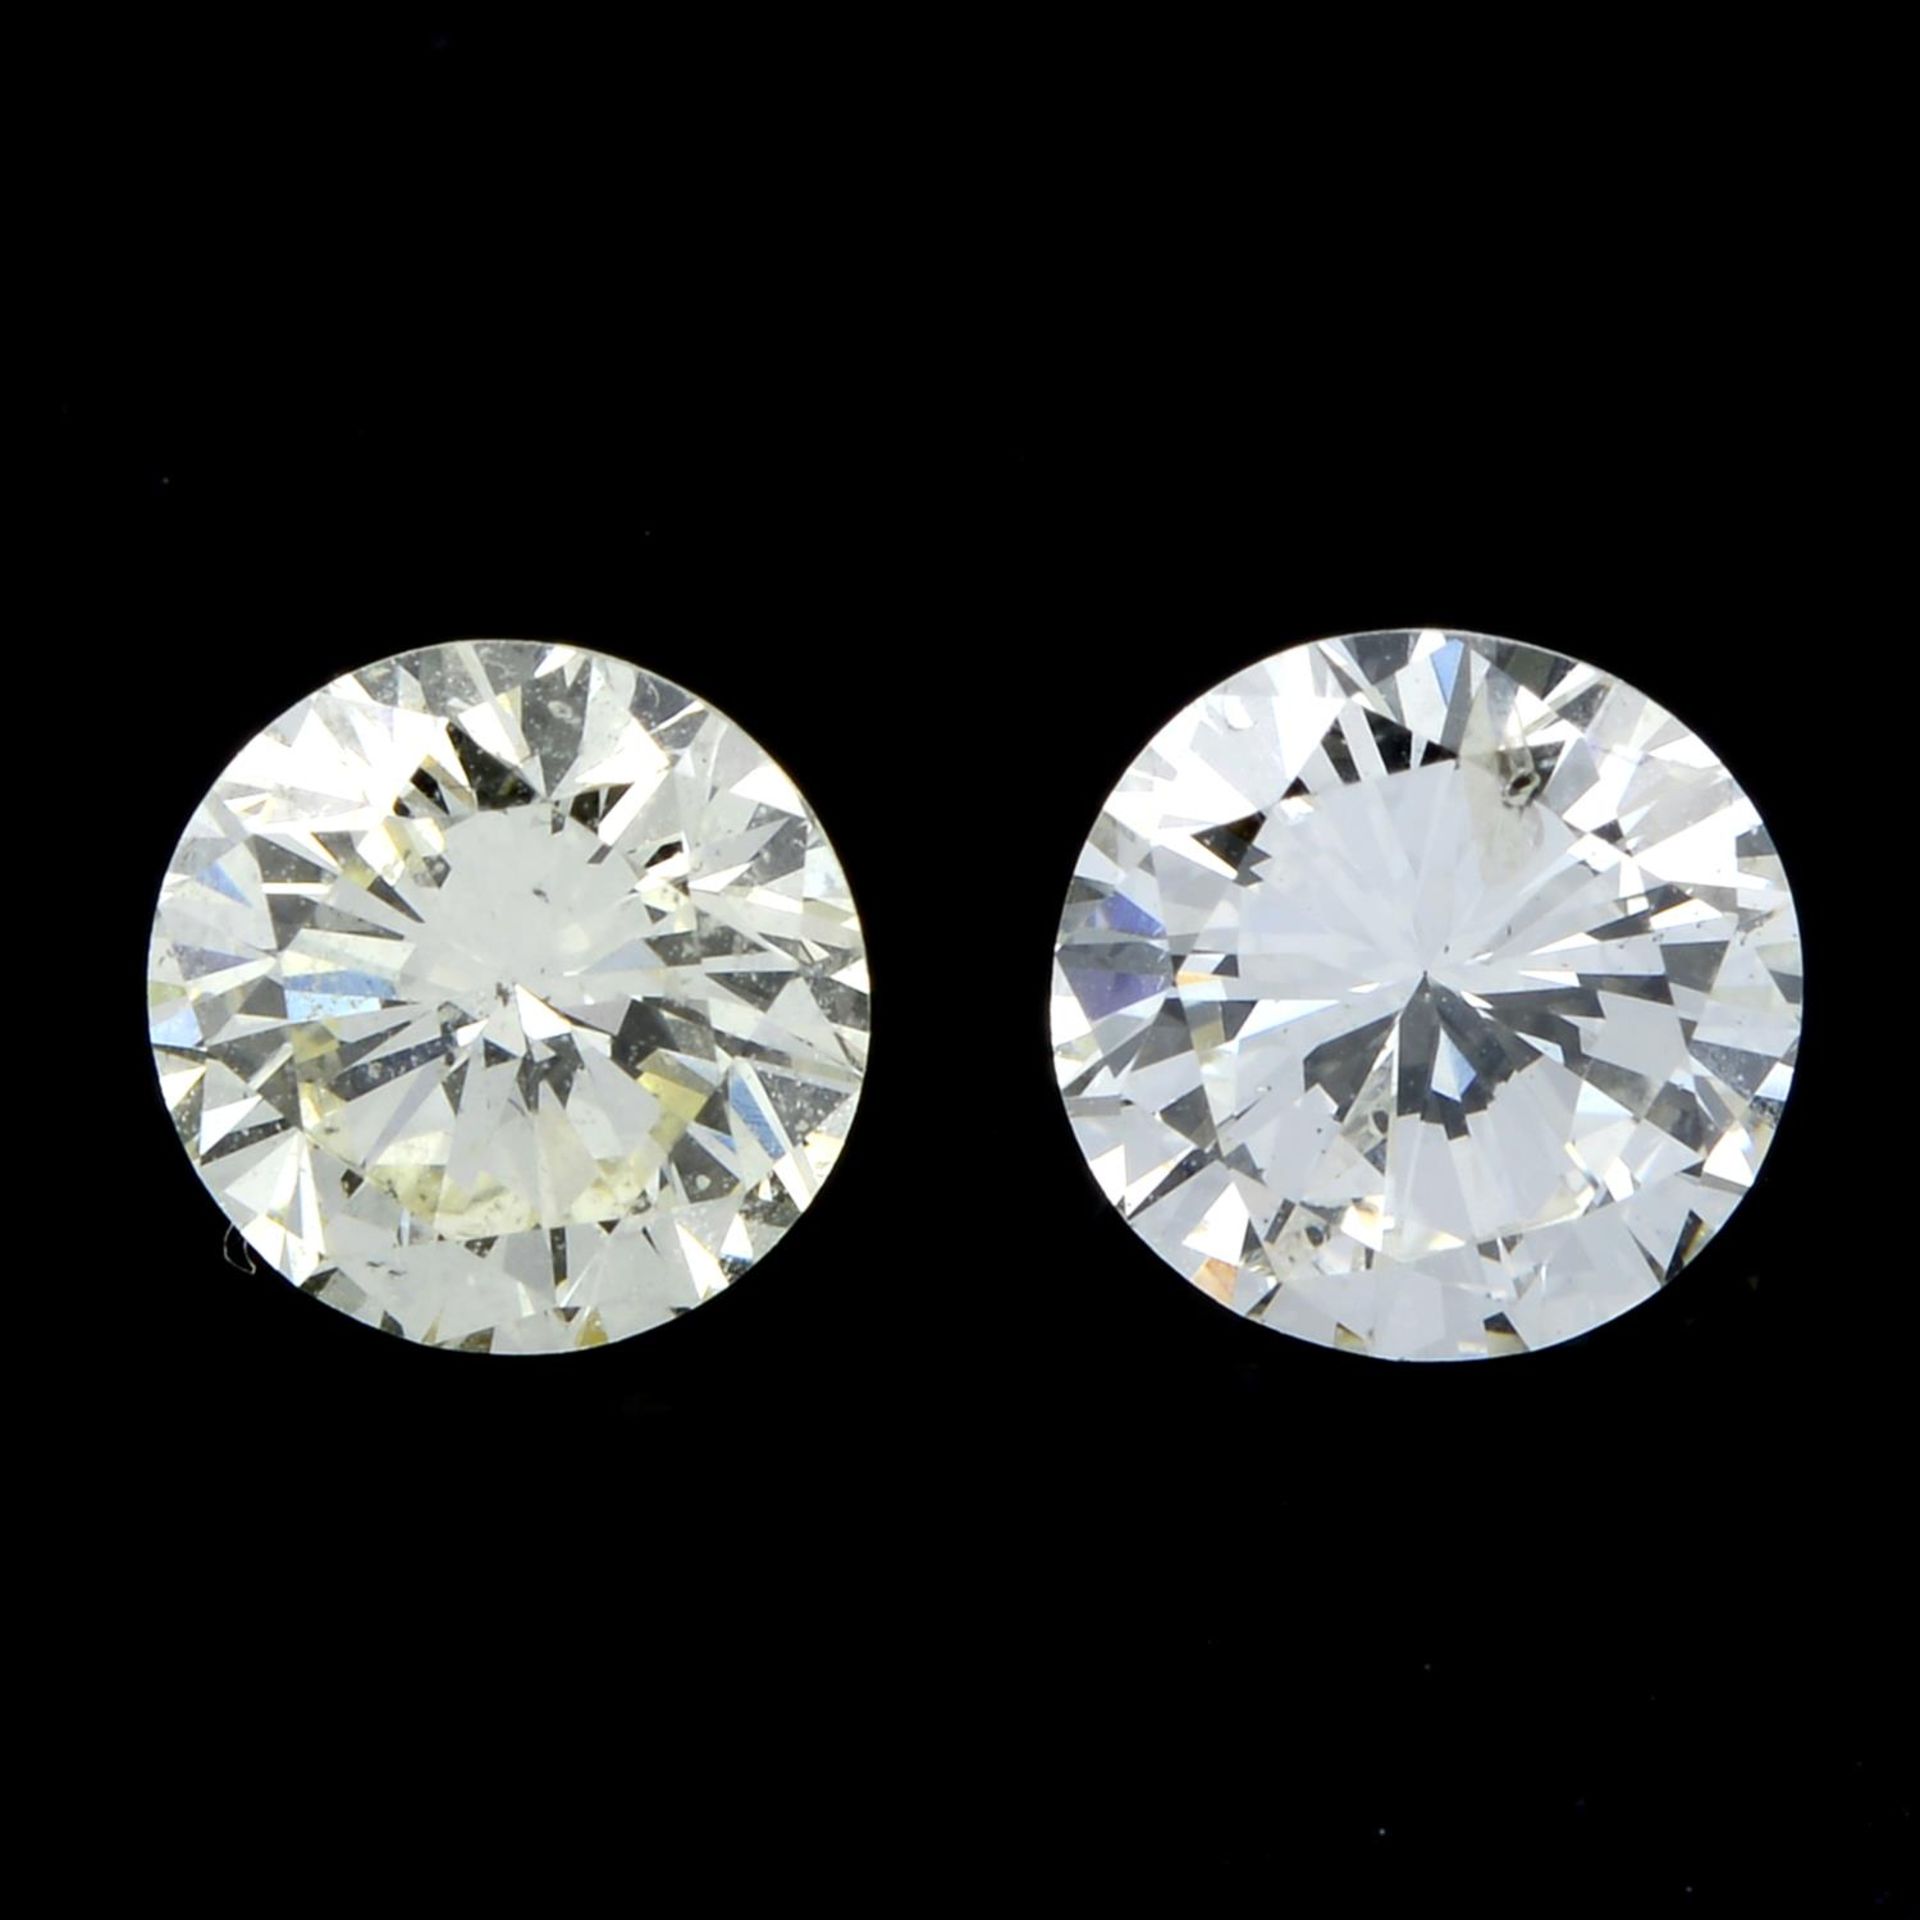 A pair of round brilliant-cut diamonds, weight 0.53cts and 0.50cts.